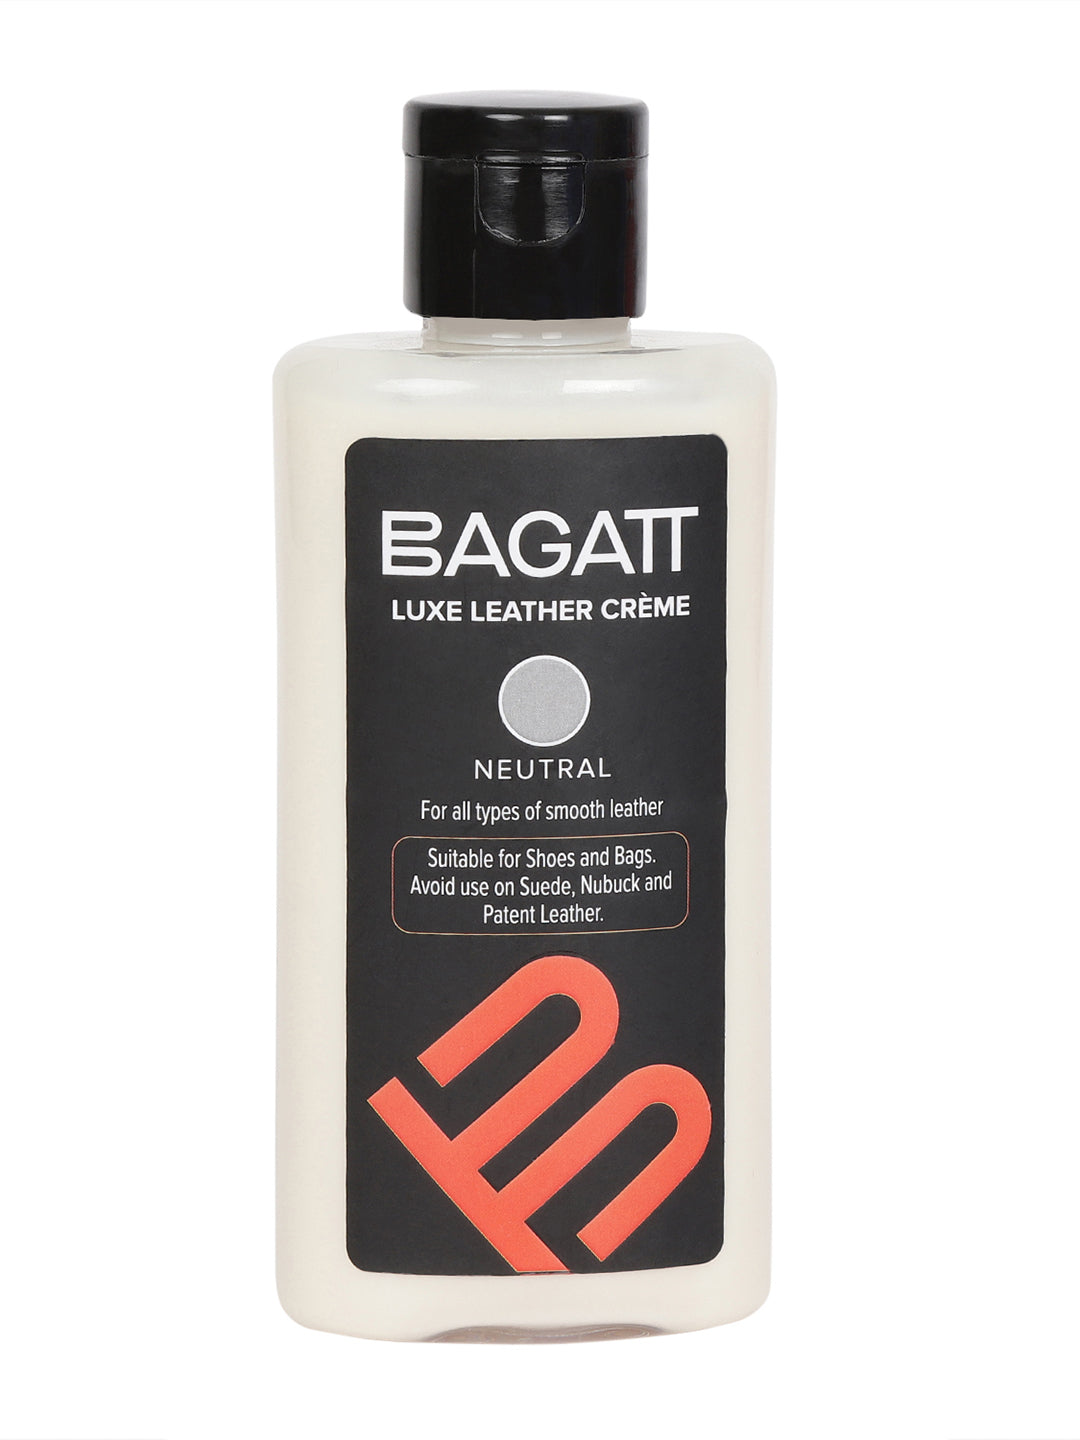 BAGATT Neutral Luxe Leather Creme